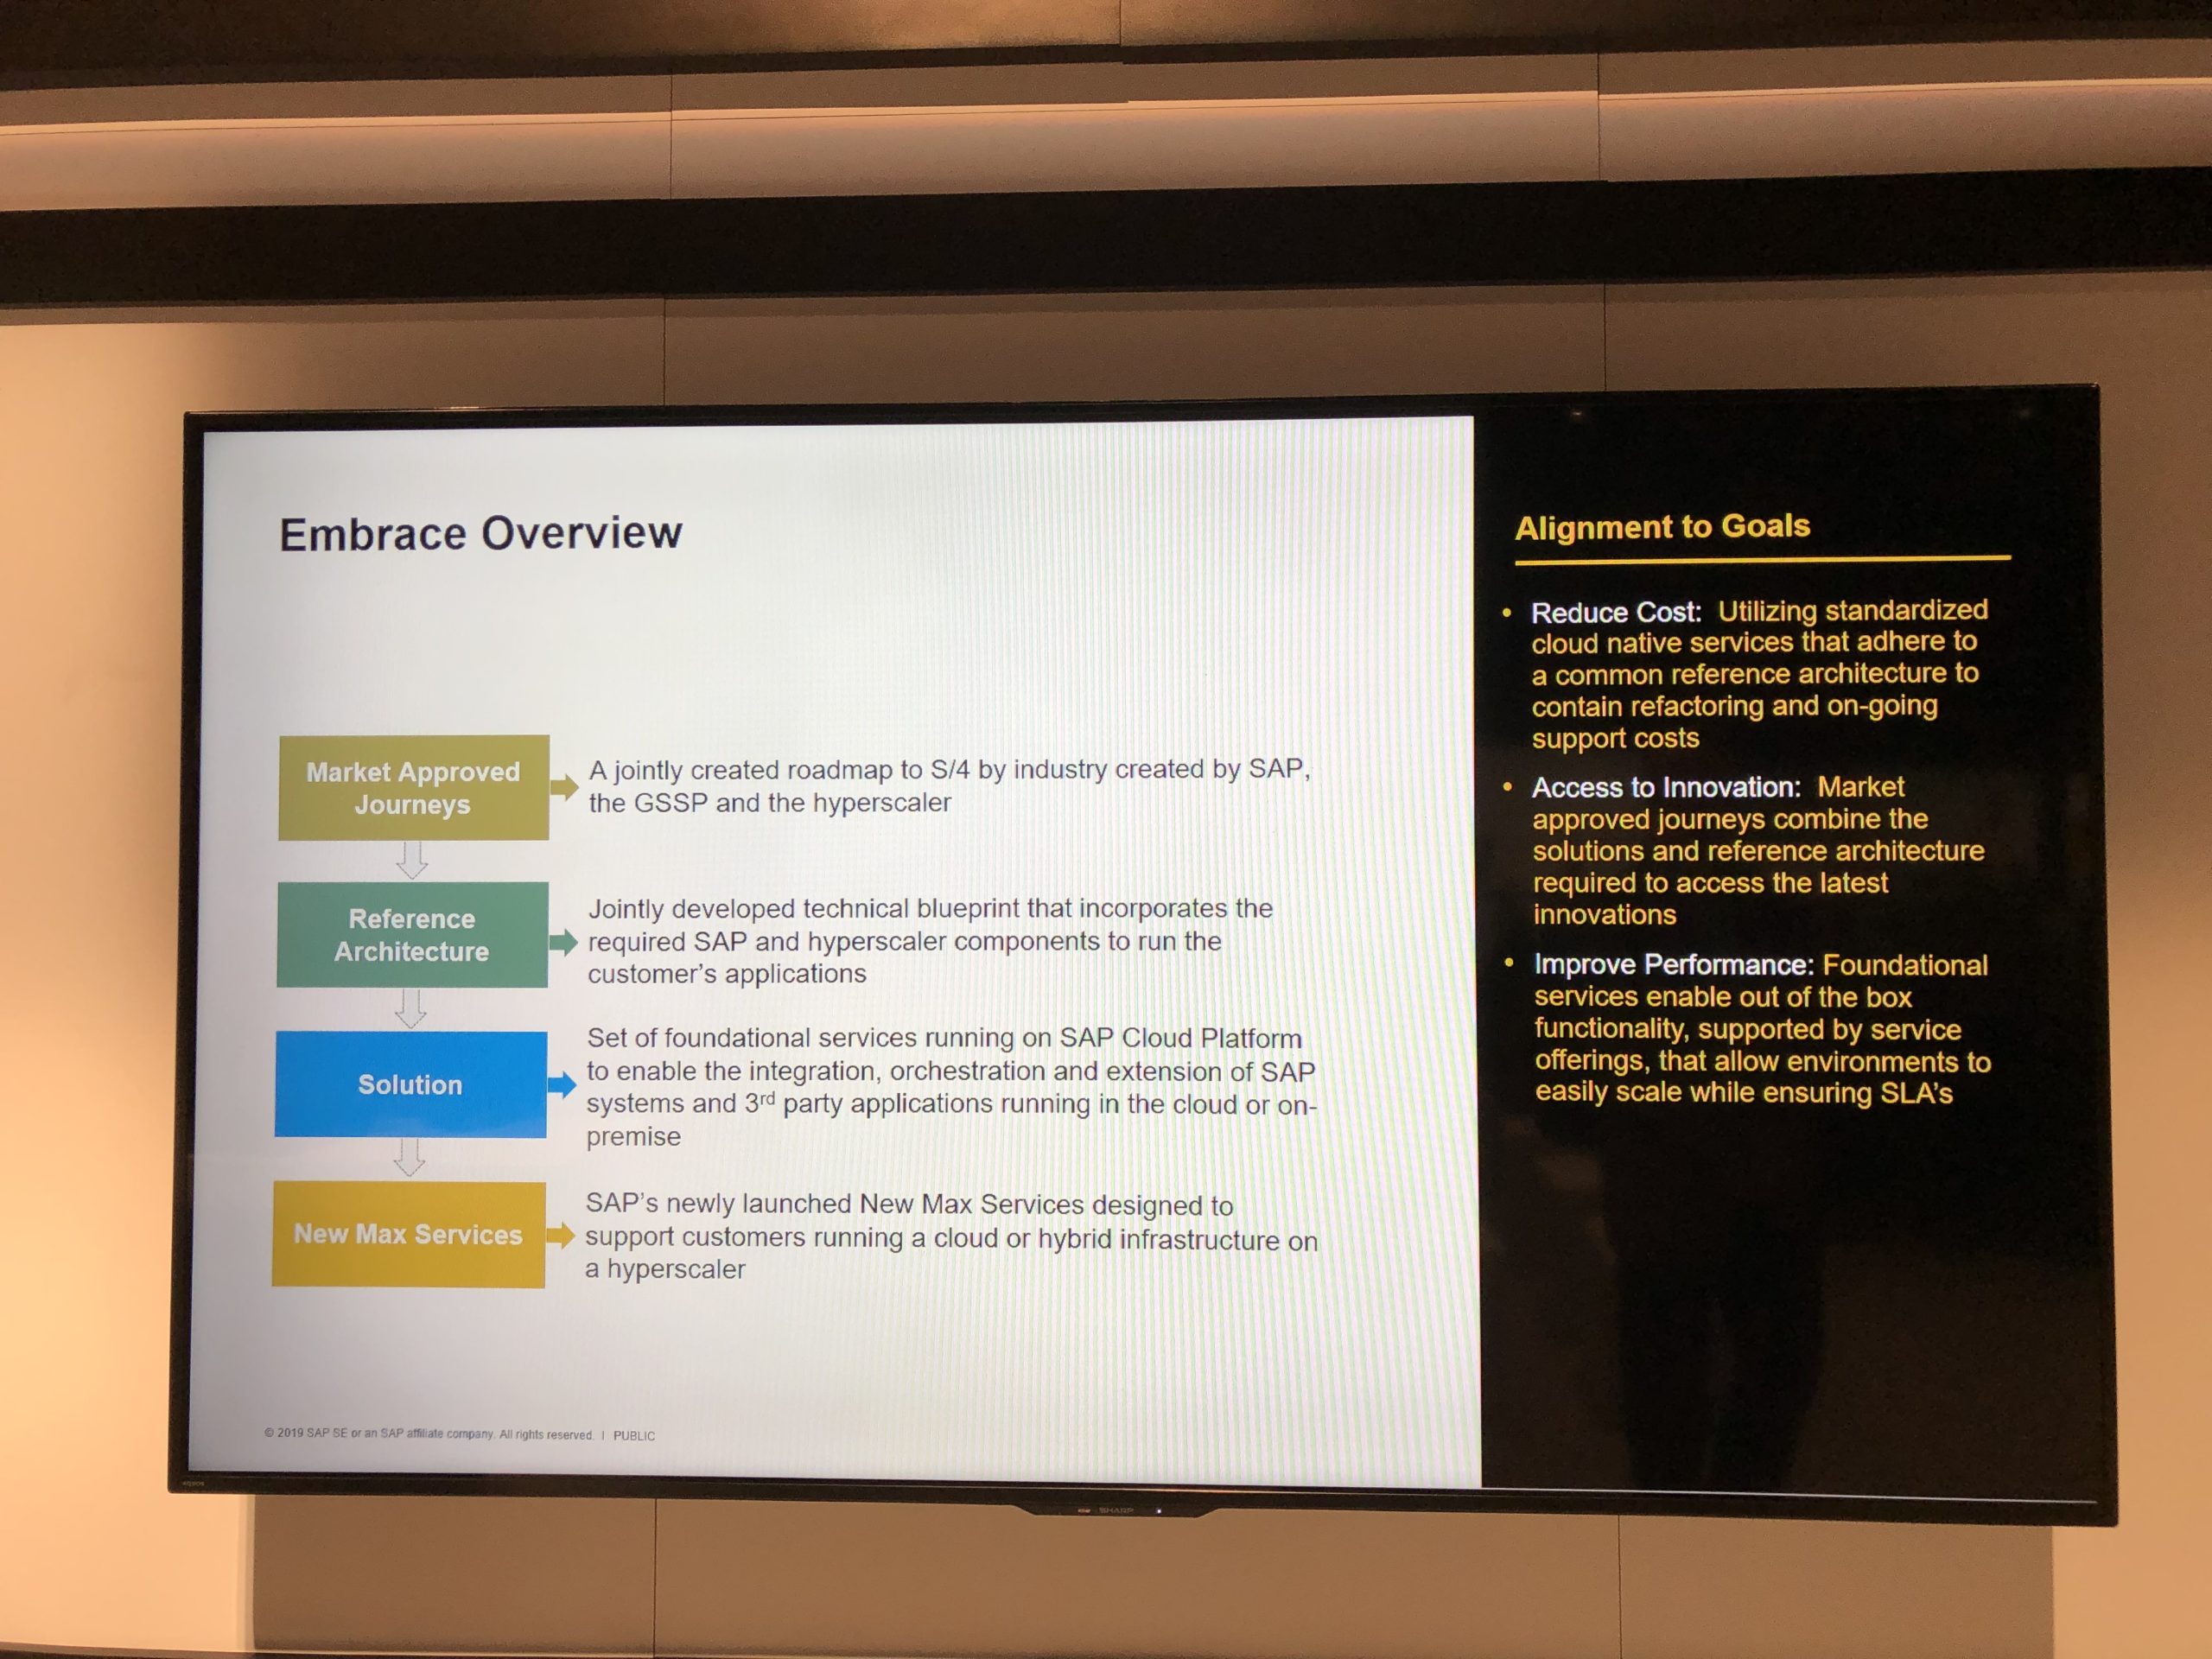 An overview of SAP's new Embrace ecosystem on display at SAP SAPPHIRE 2019